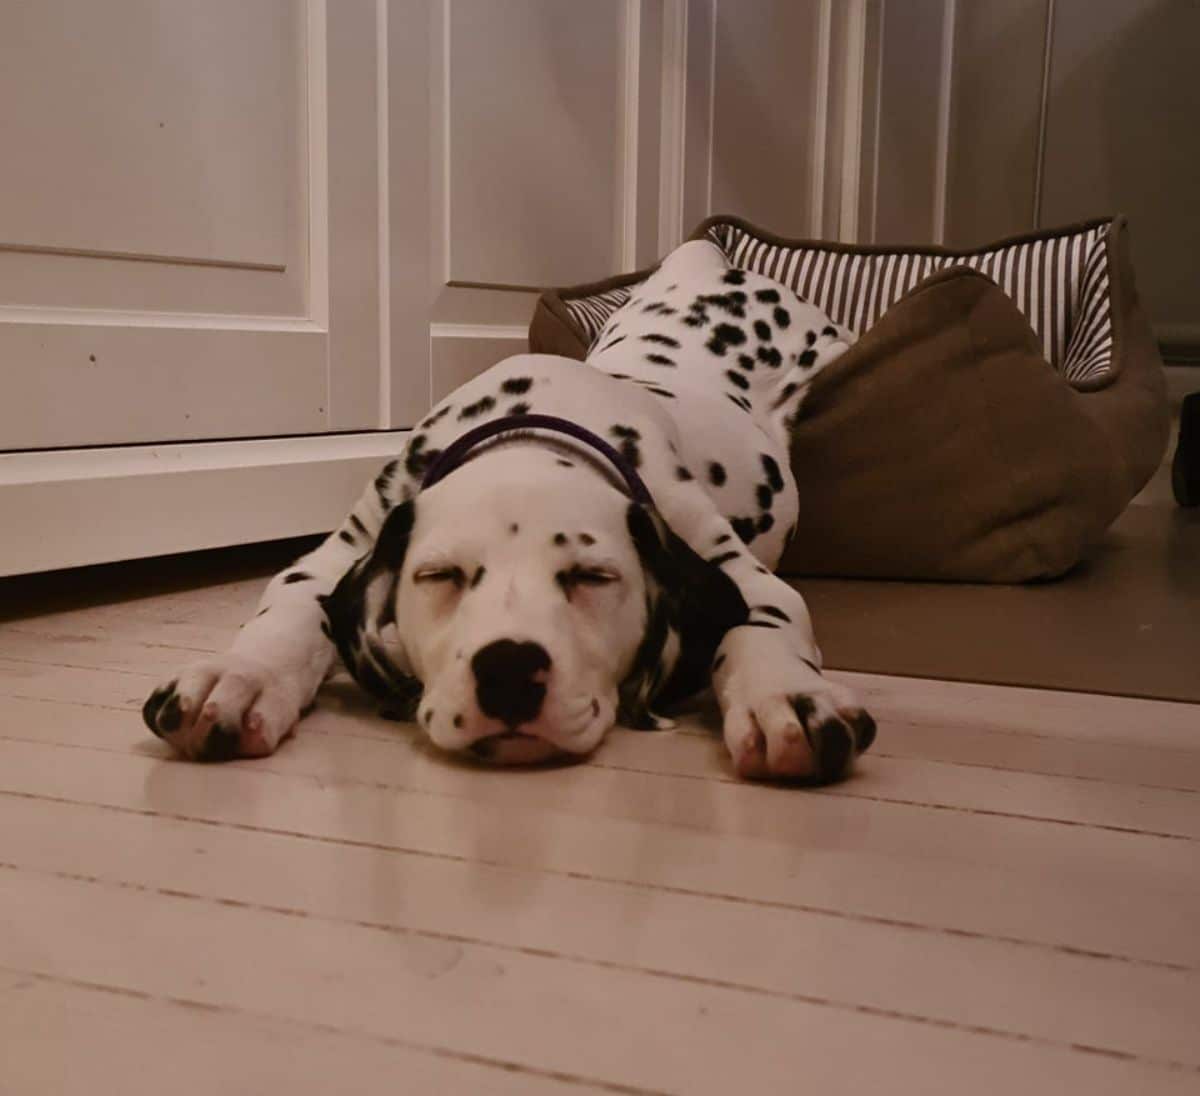 dalmation sleeping with the back half of the body in a brown dog bed and the rest of it on the floor